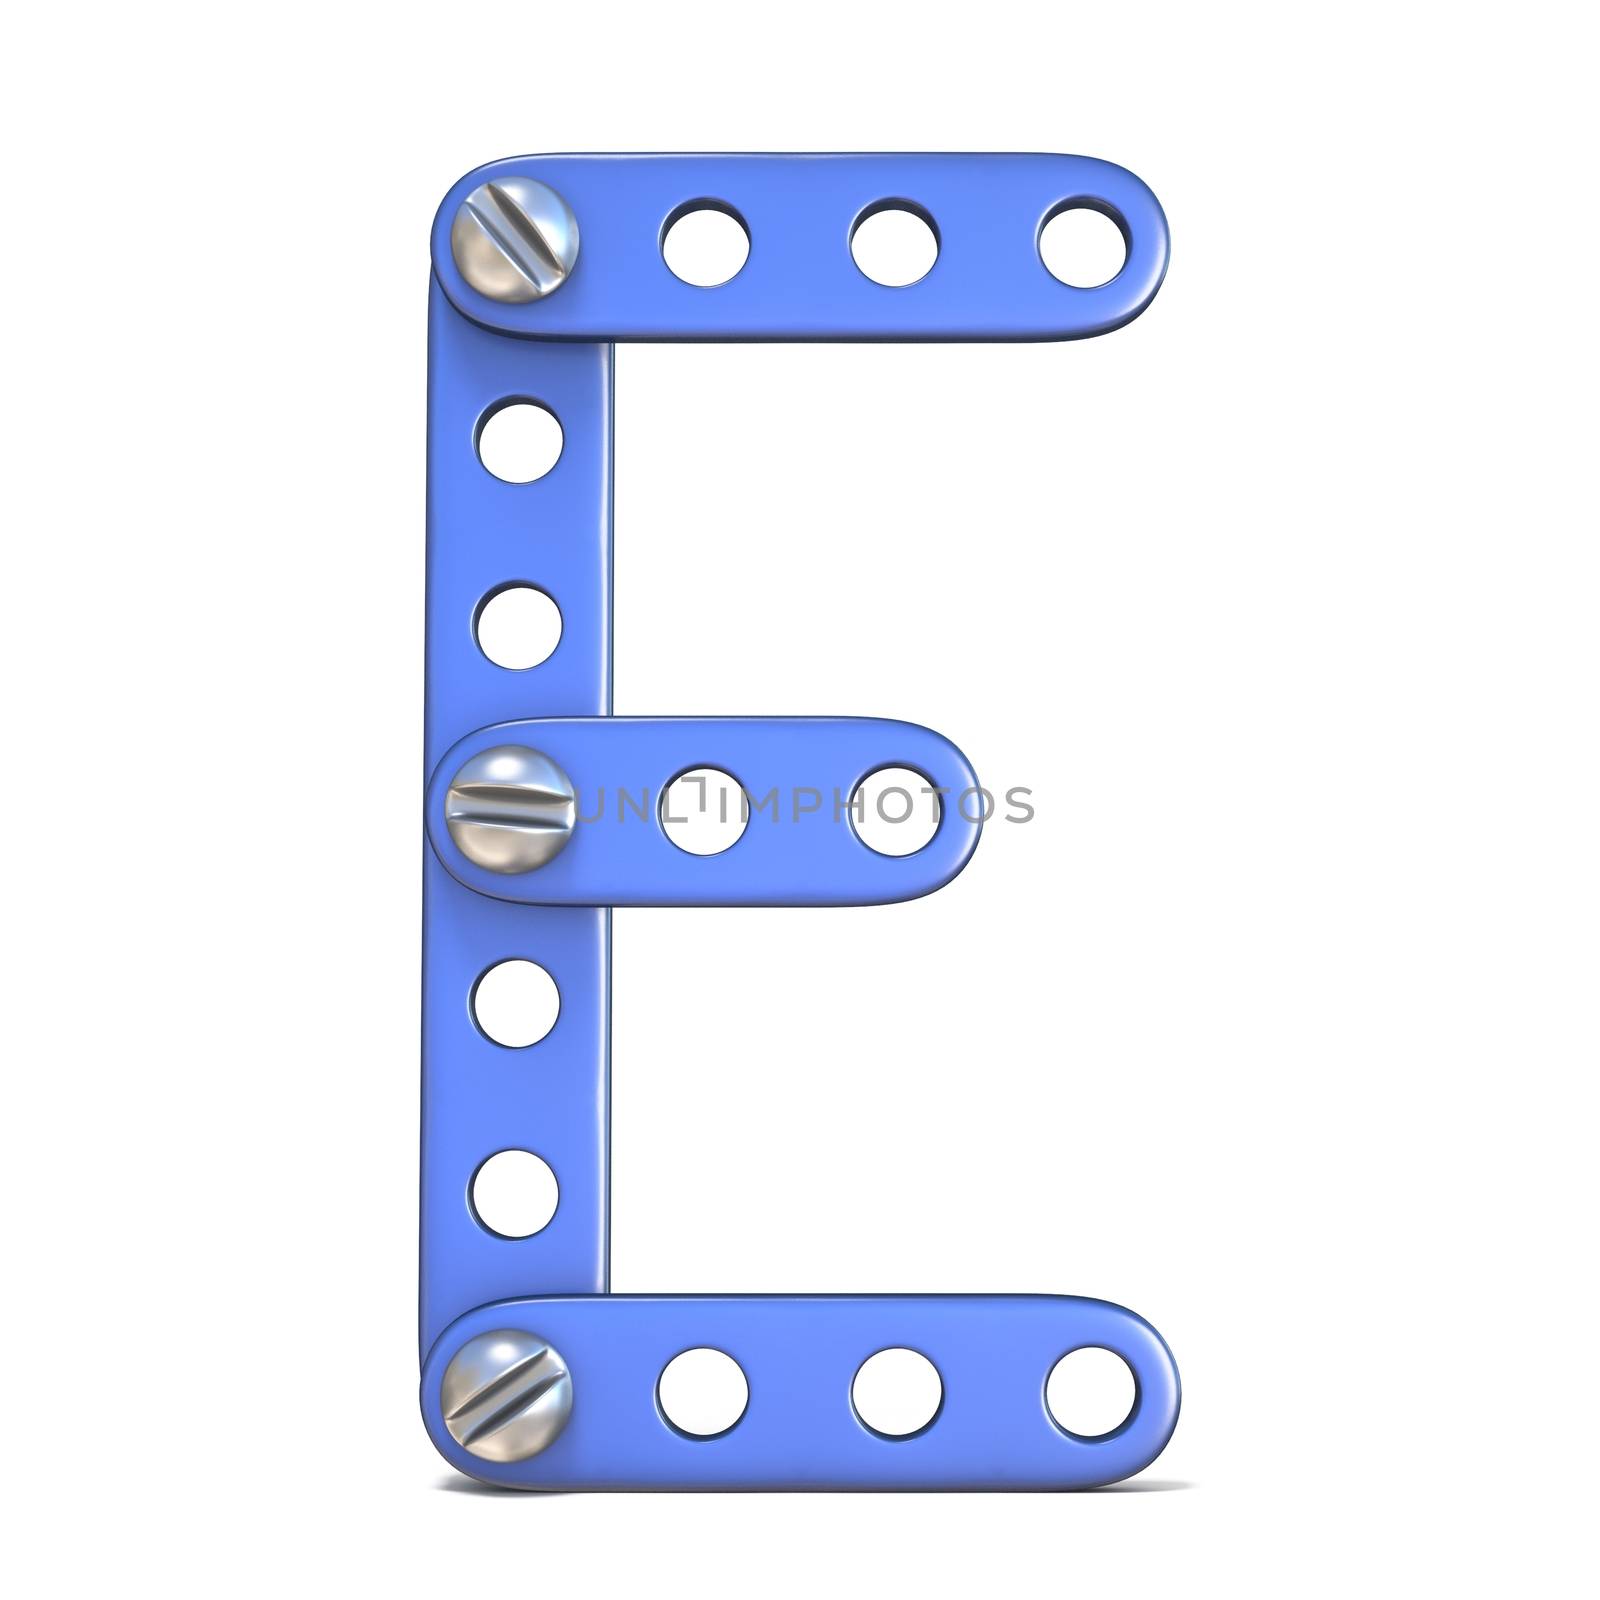 Alphabet made of blue metal constructor toy Letter E 3D by djmilic